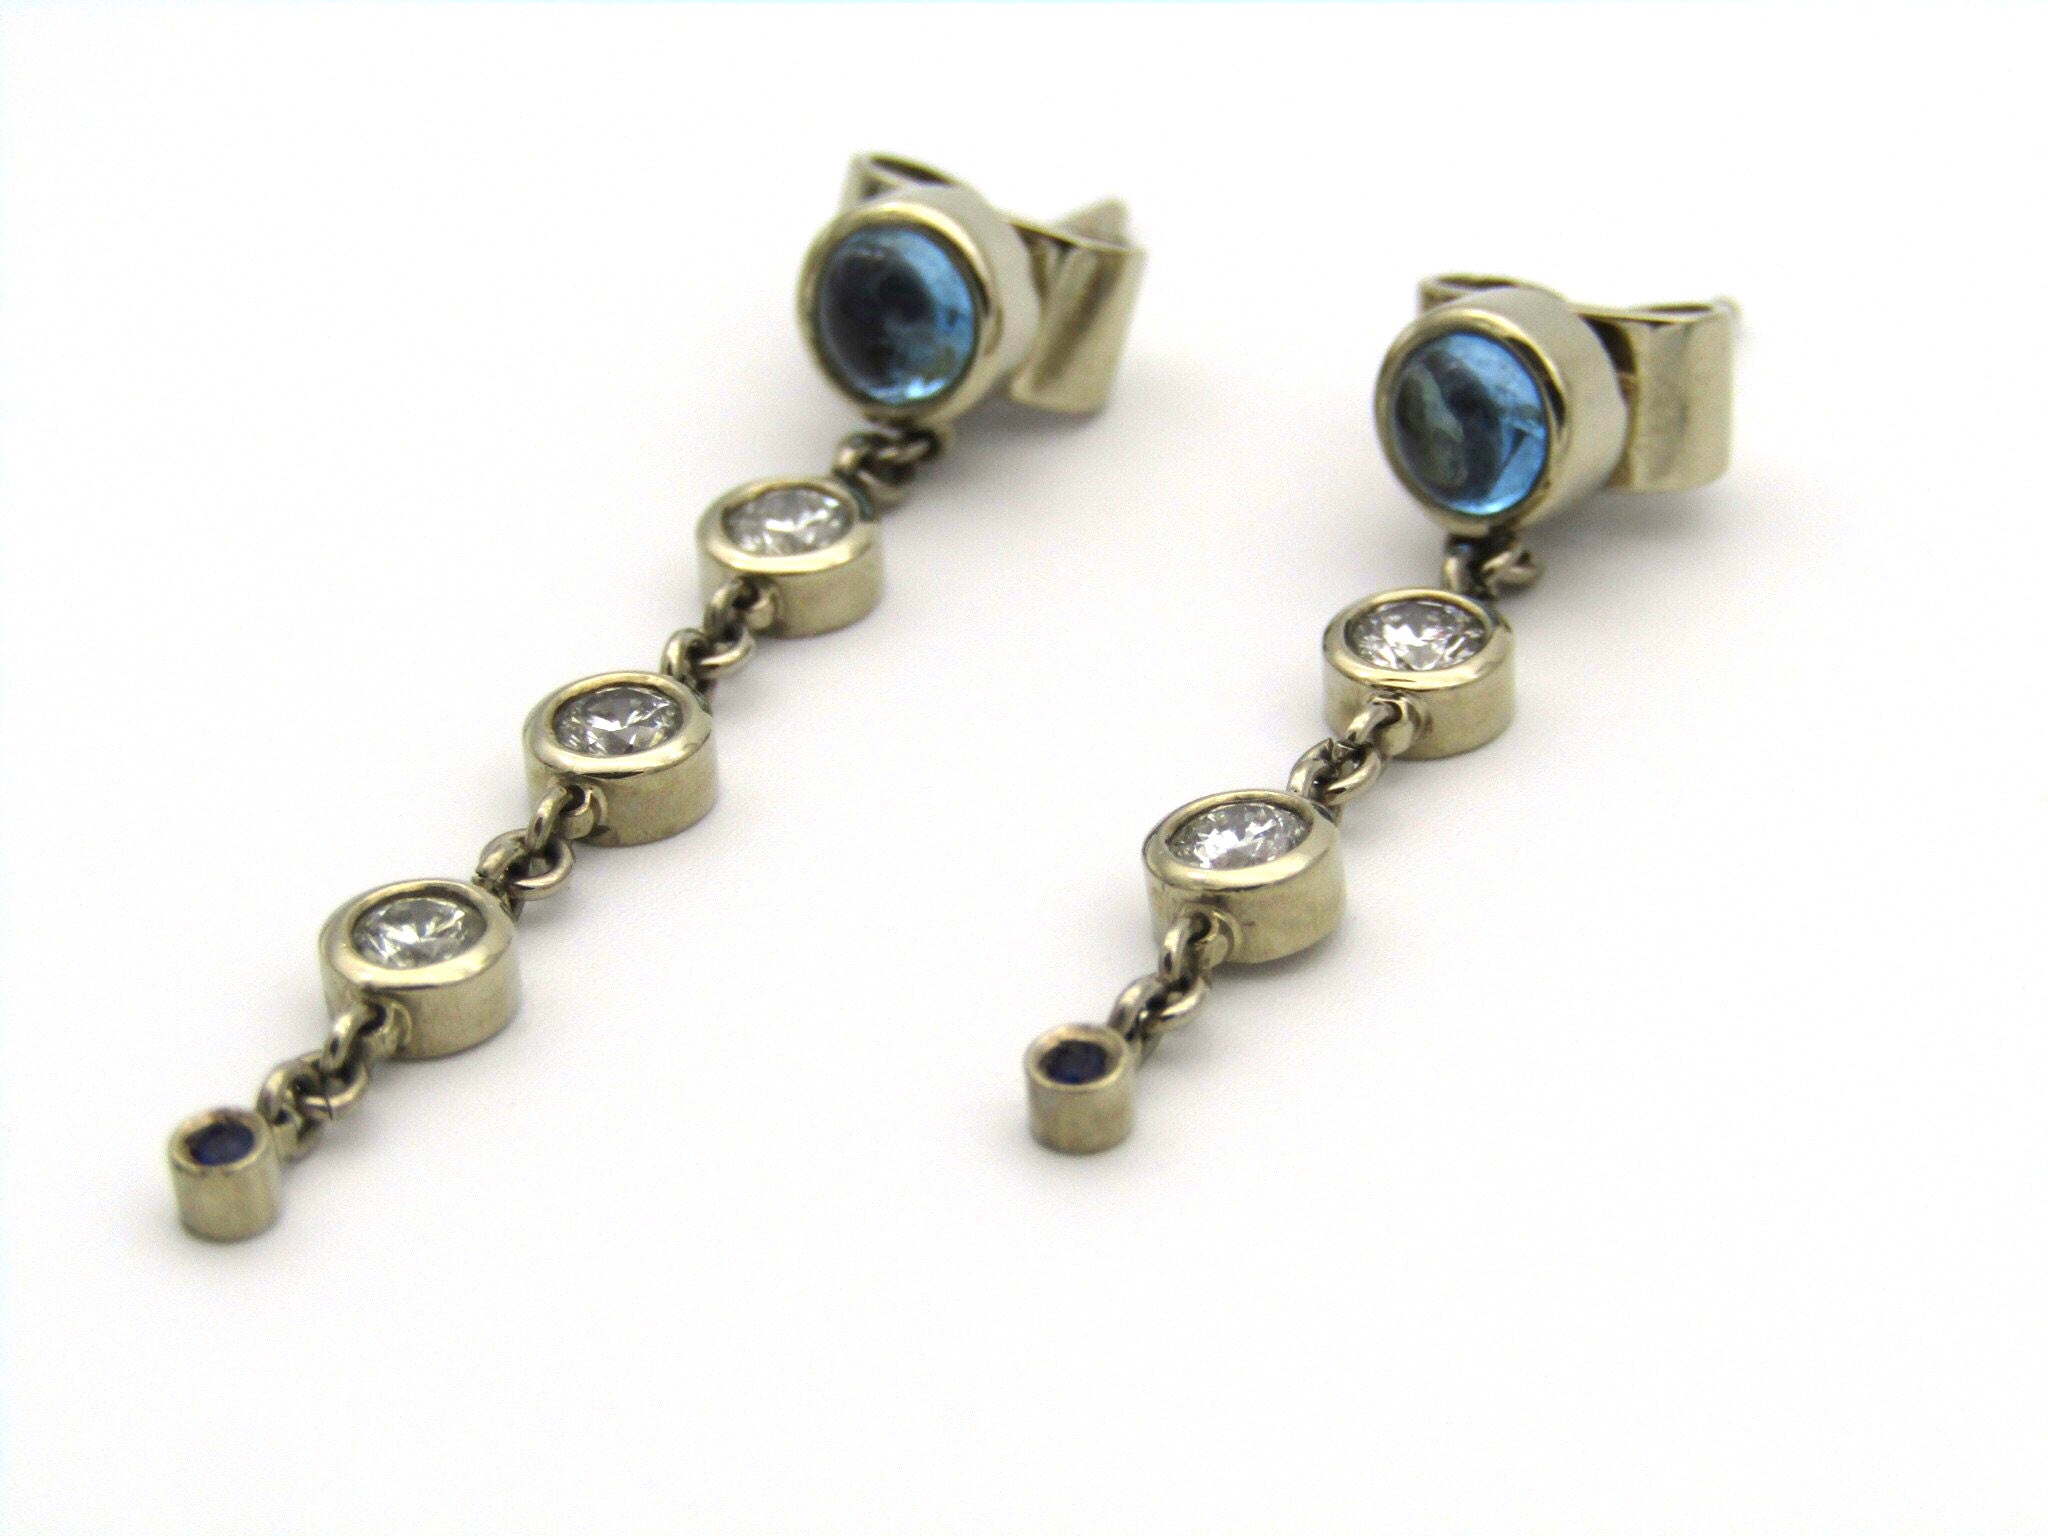 18kt gold diamond and blue topaz earrings by Orpheo.